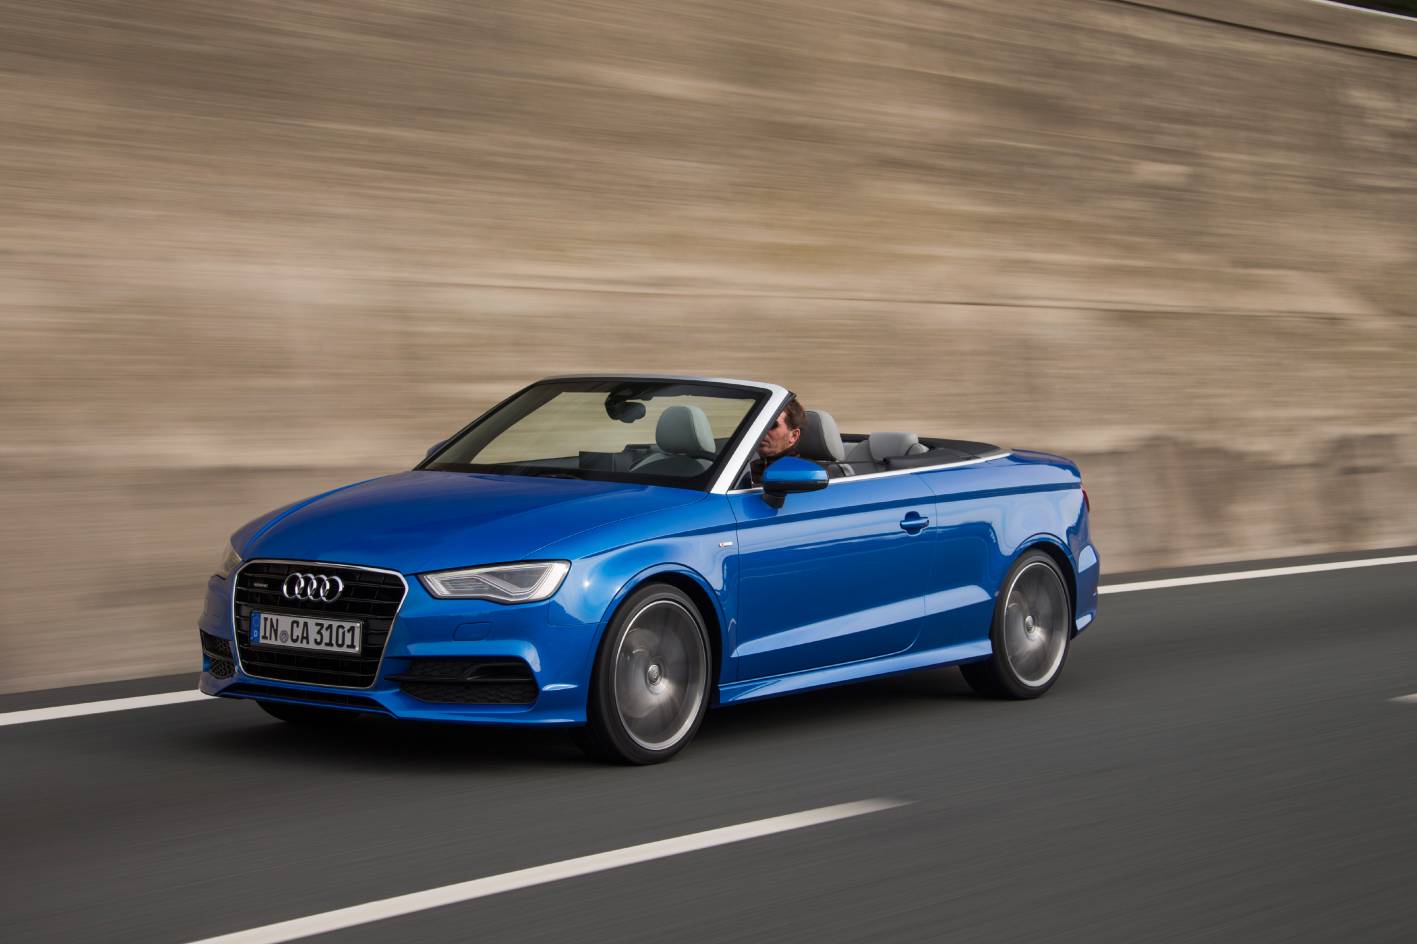 New Audi A3 Cabriolet on sale in June